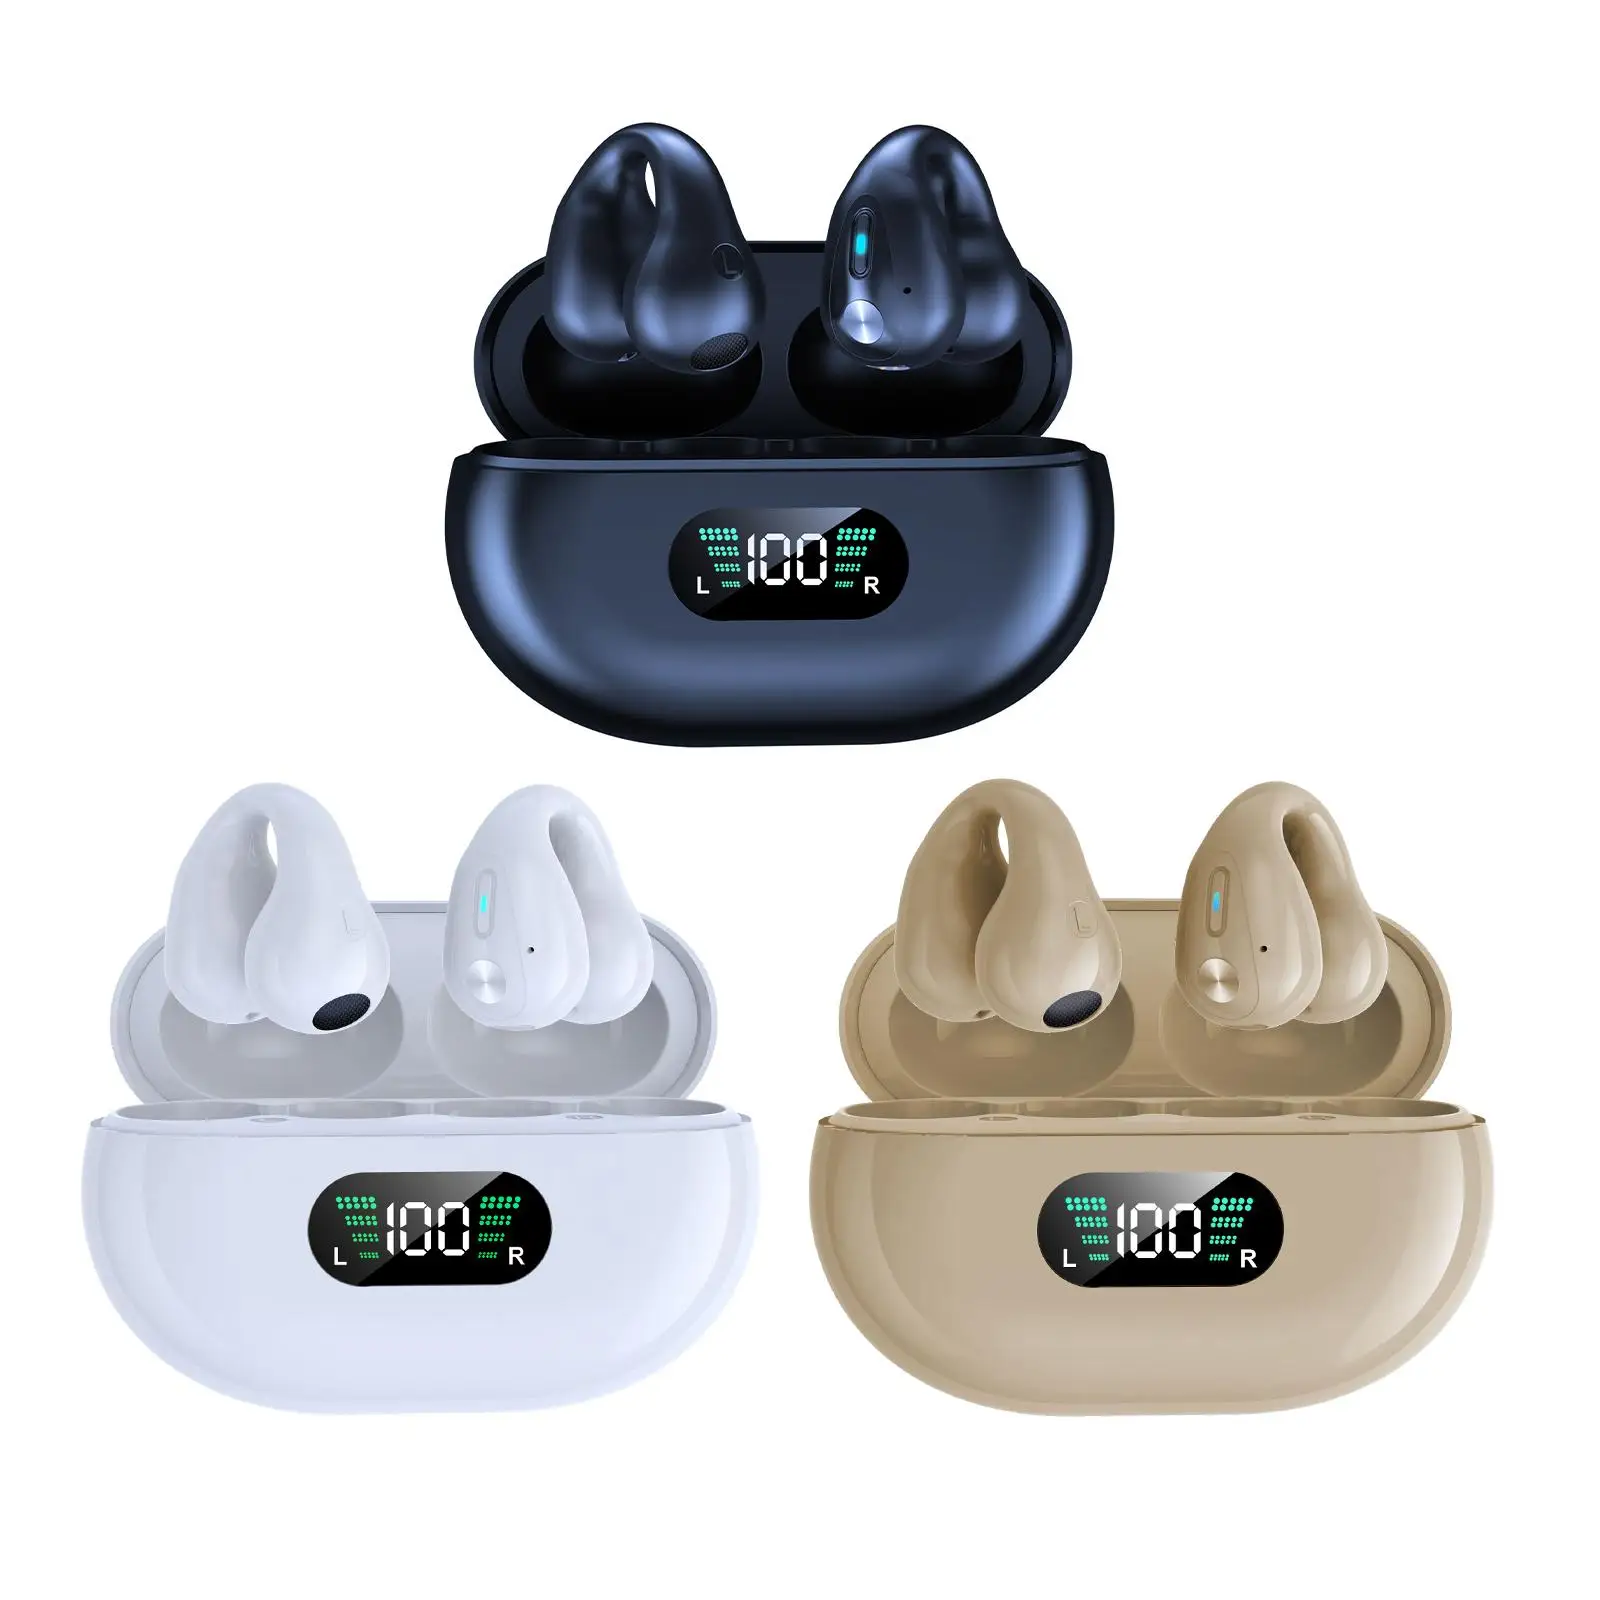 Adjustable Volume Ear Clip Headphones Handsfree Calling Touch Control Noise Reduction HiFi Stereo Headsets for Gym Driving Yoga